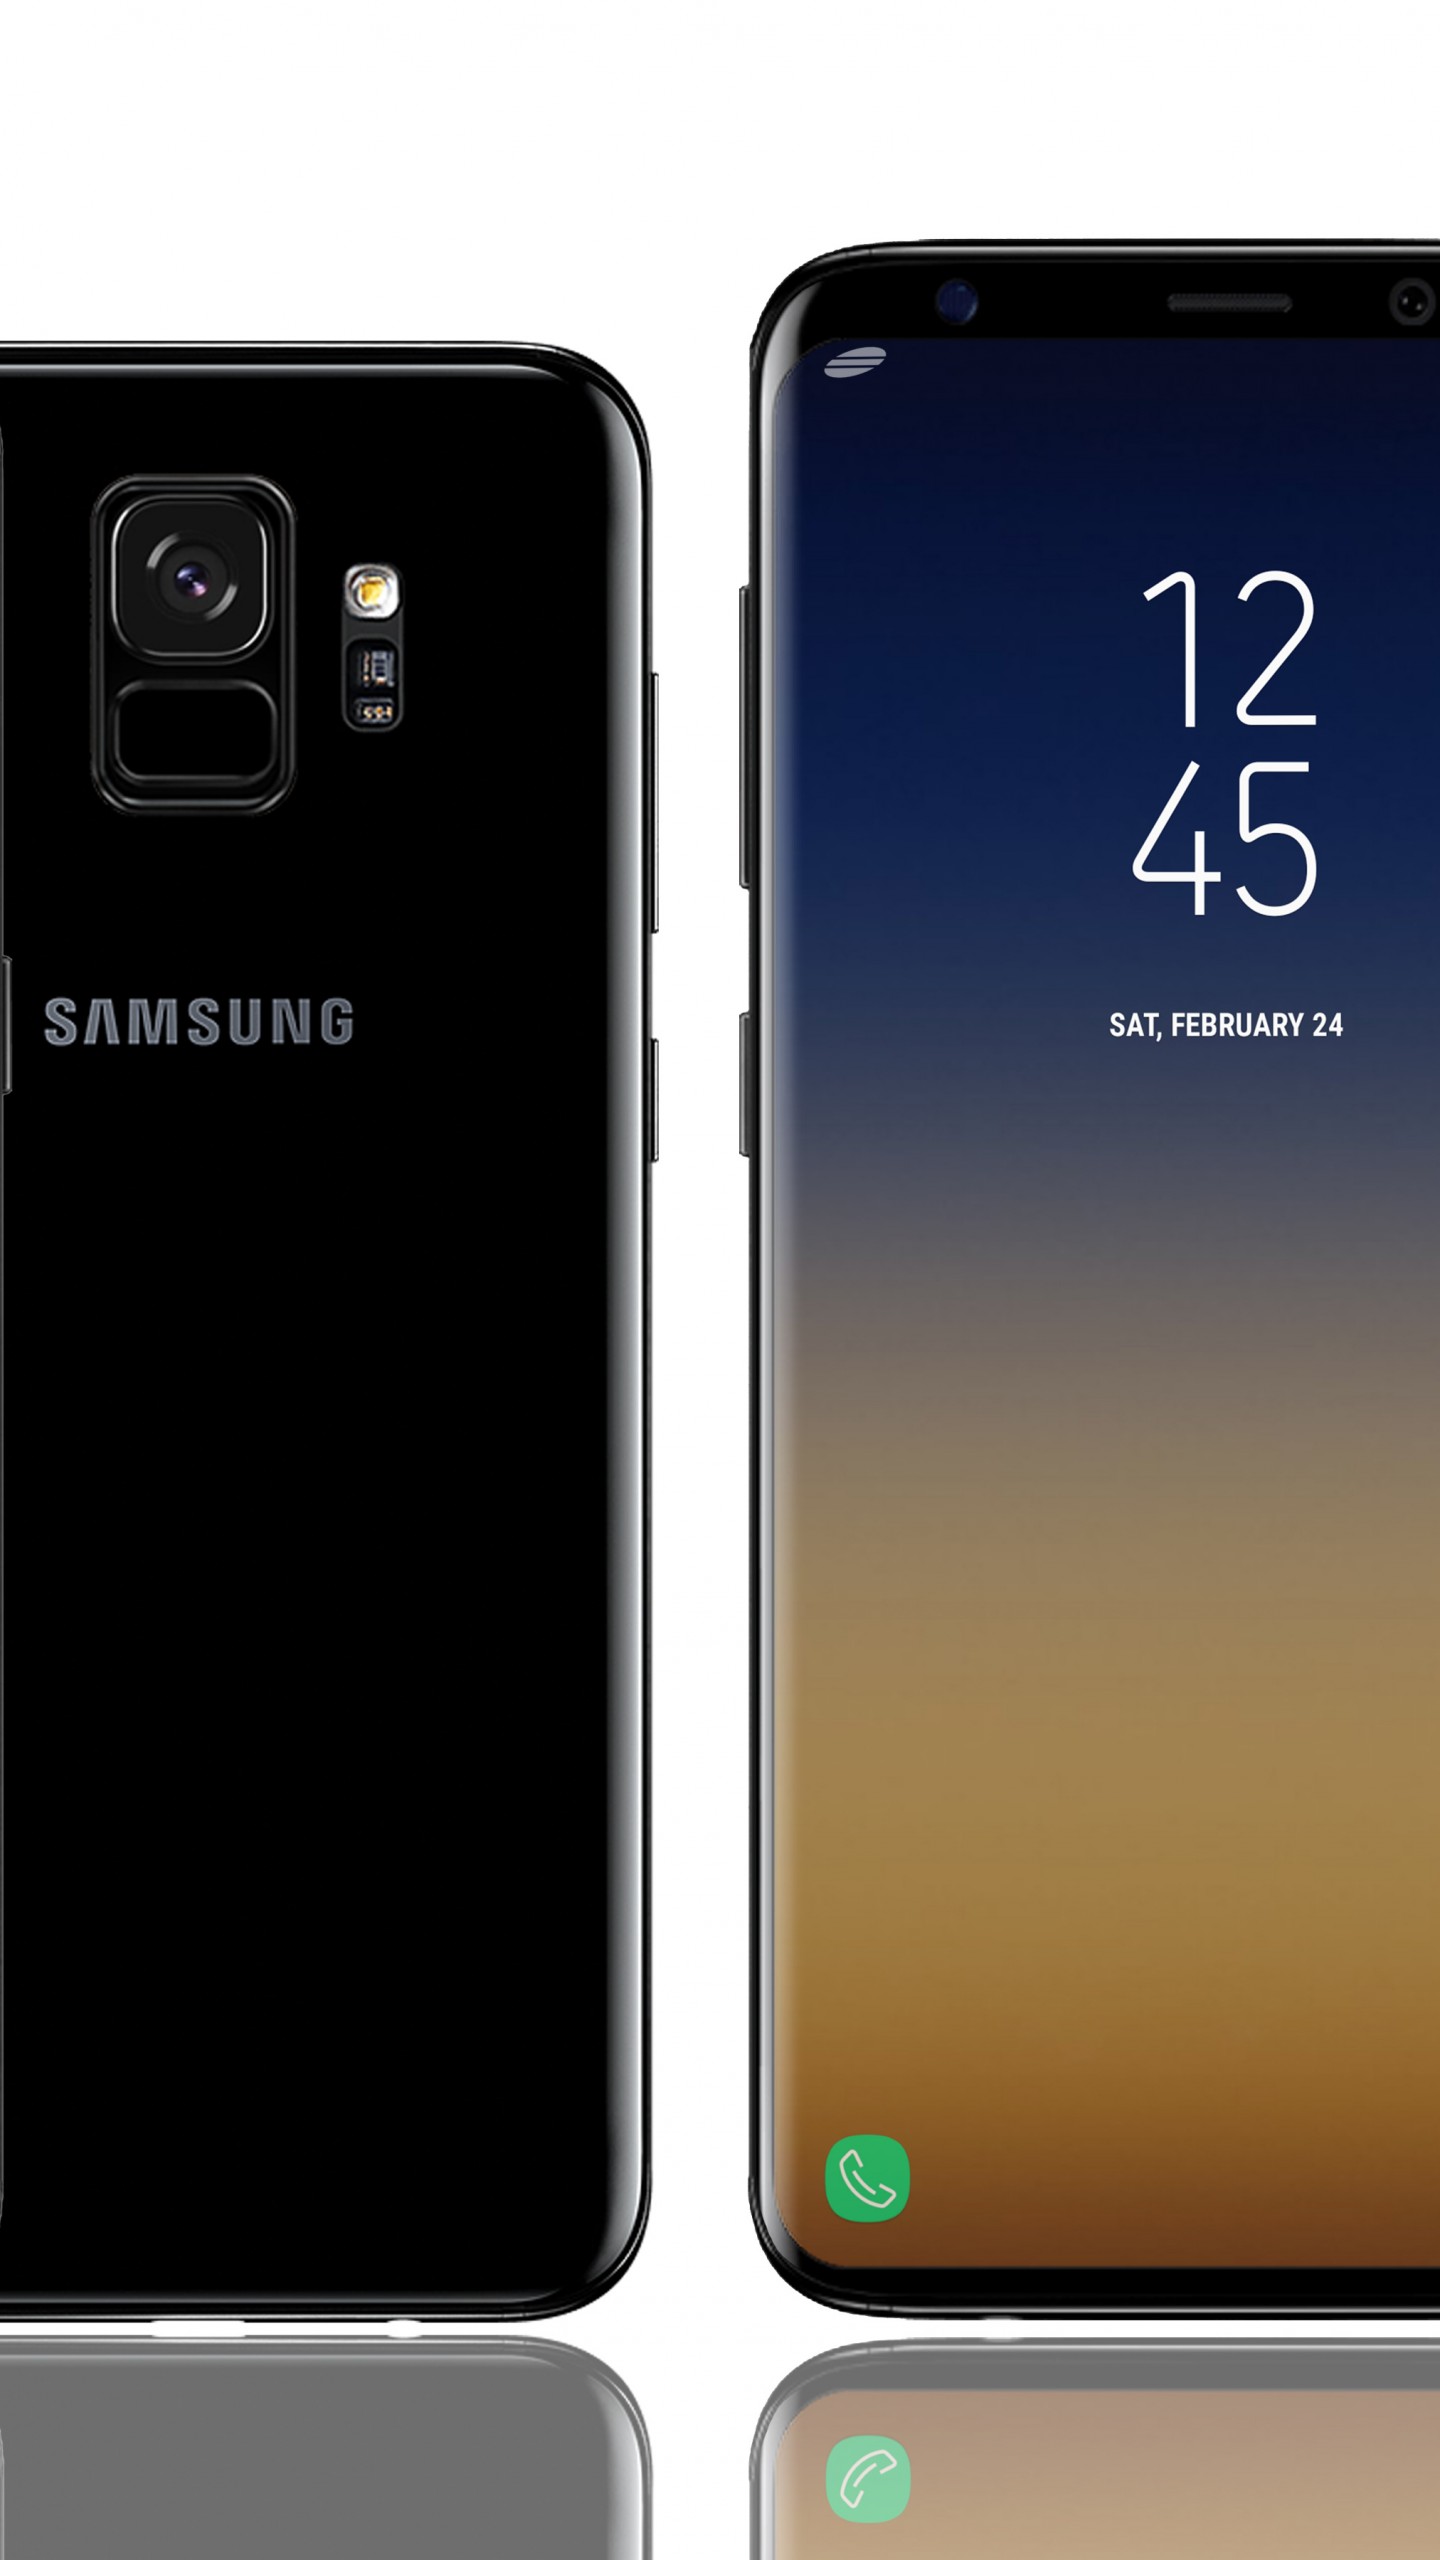 Samsung Galaxy S9 Plus Wallpapers